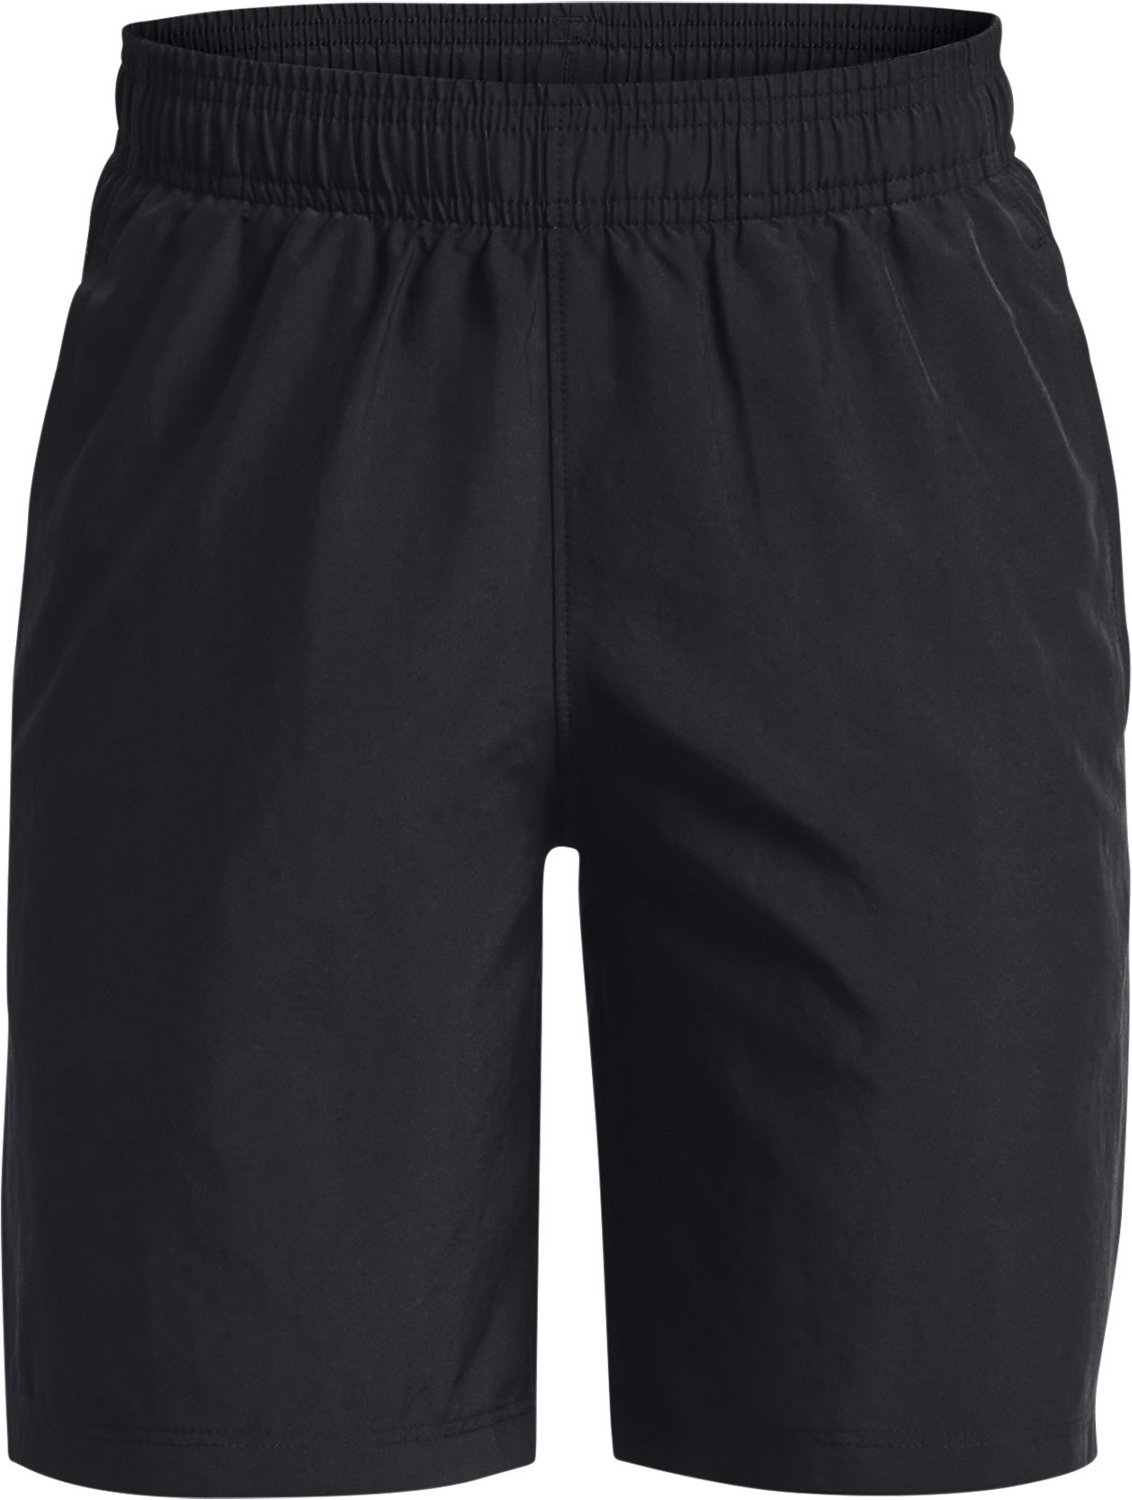 Under Armour Boys' Woven Graphic Shorts | Academy